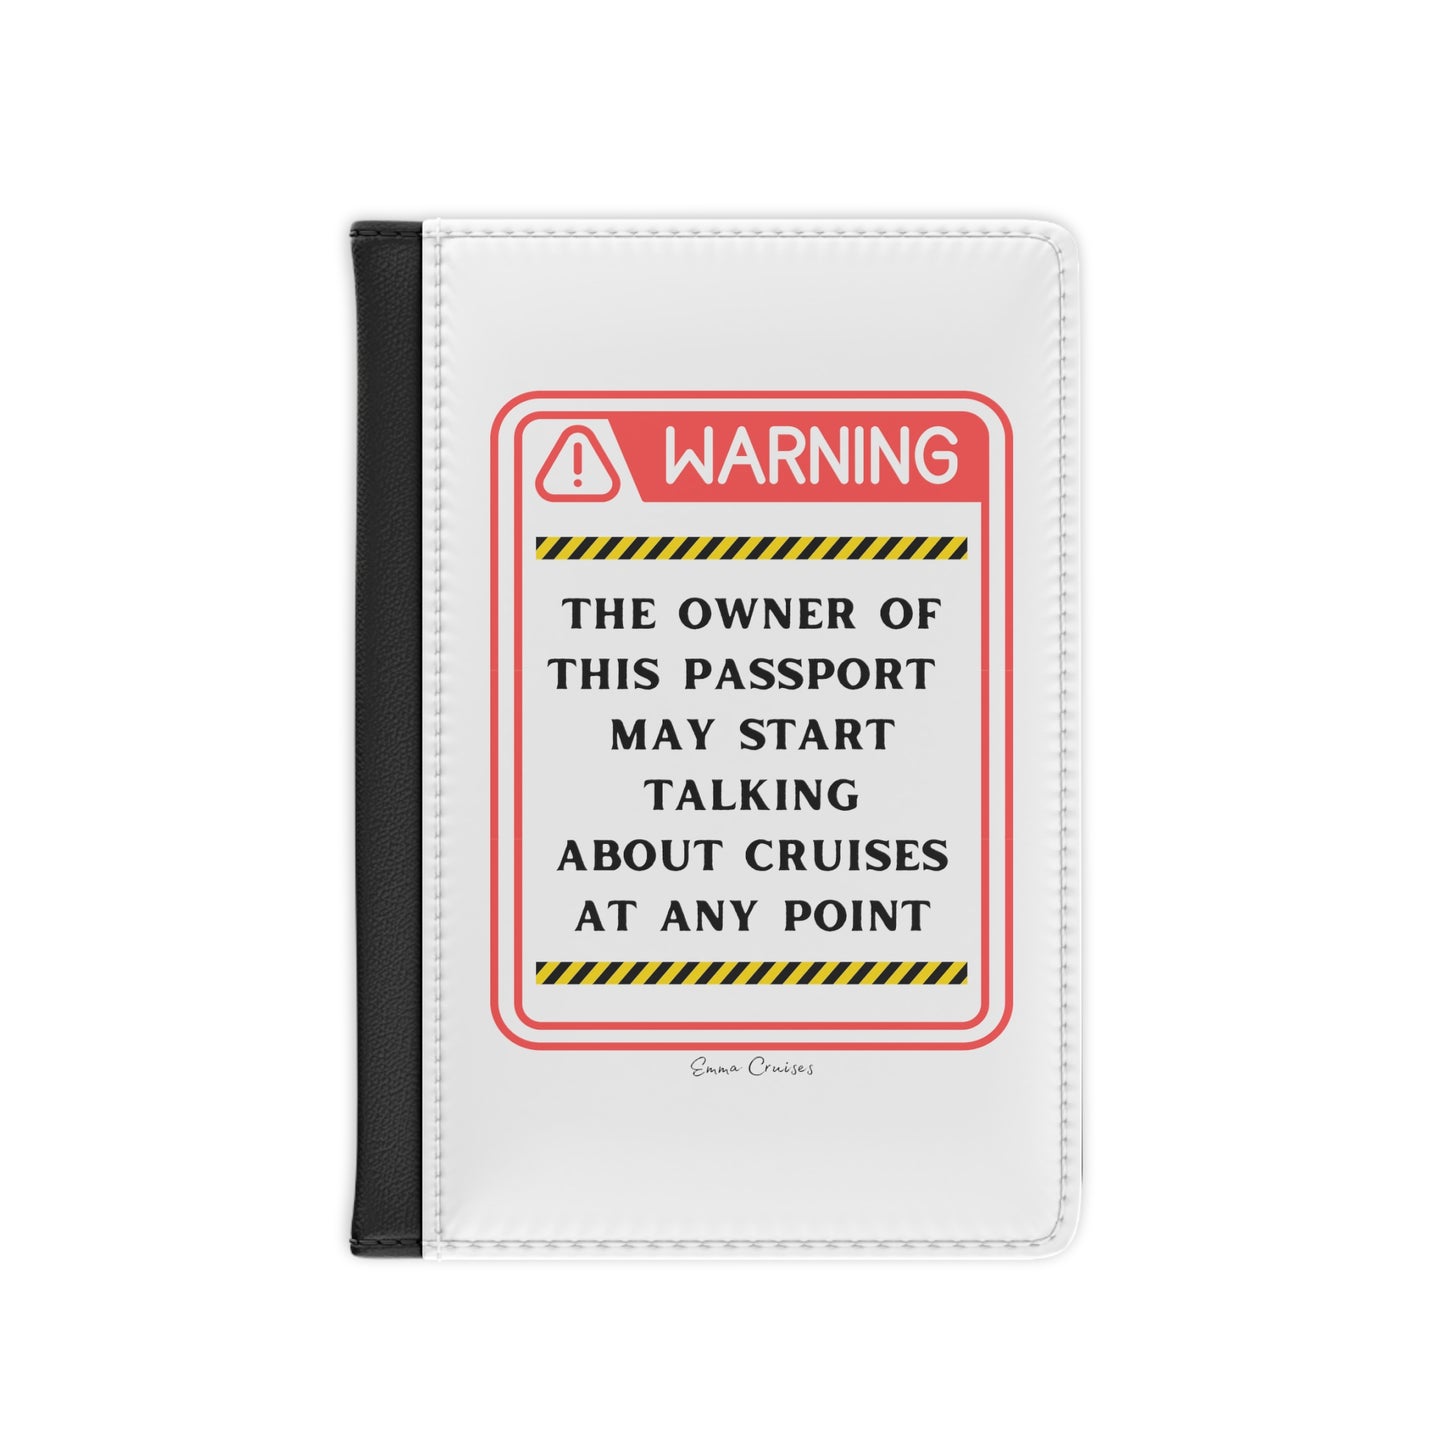 May Start Talking About Cruises - Passport Cover